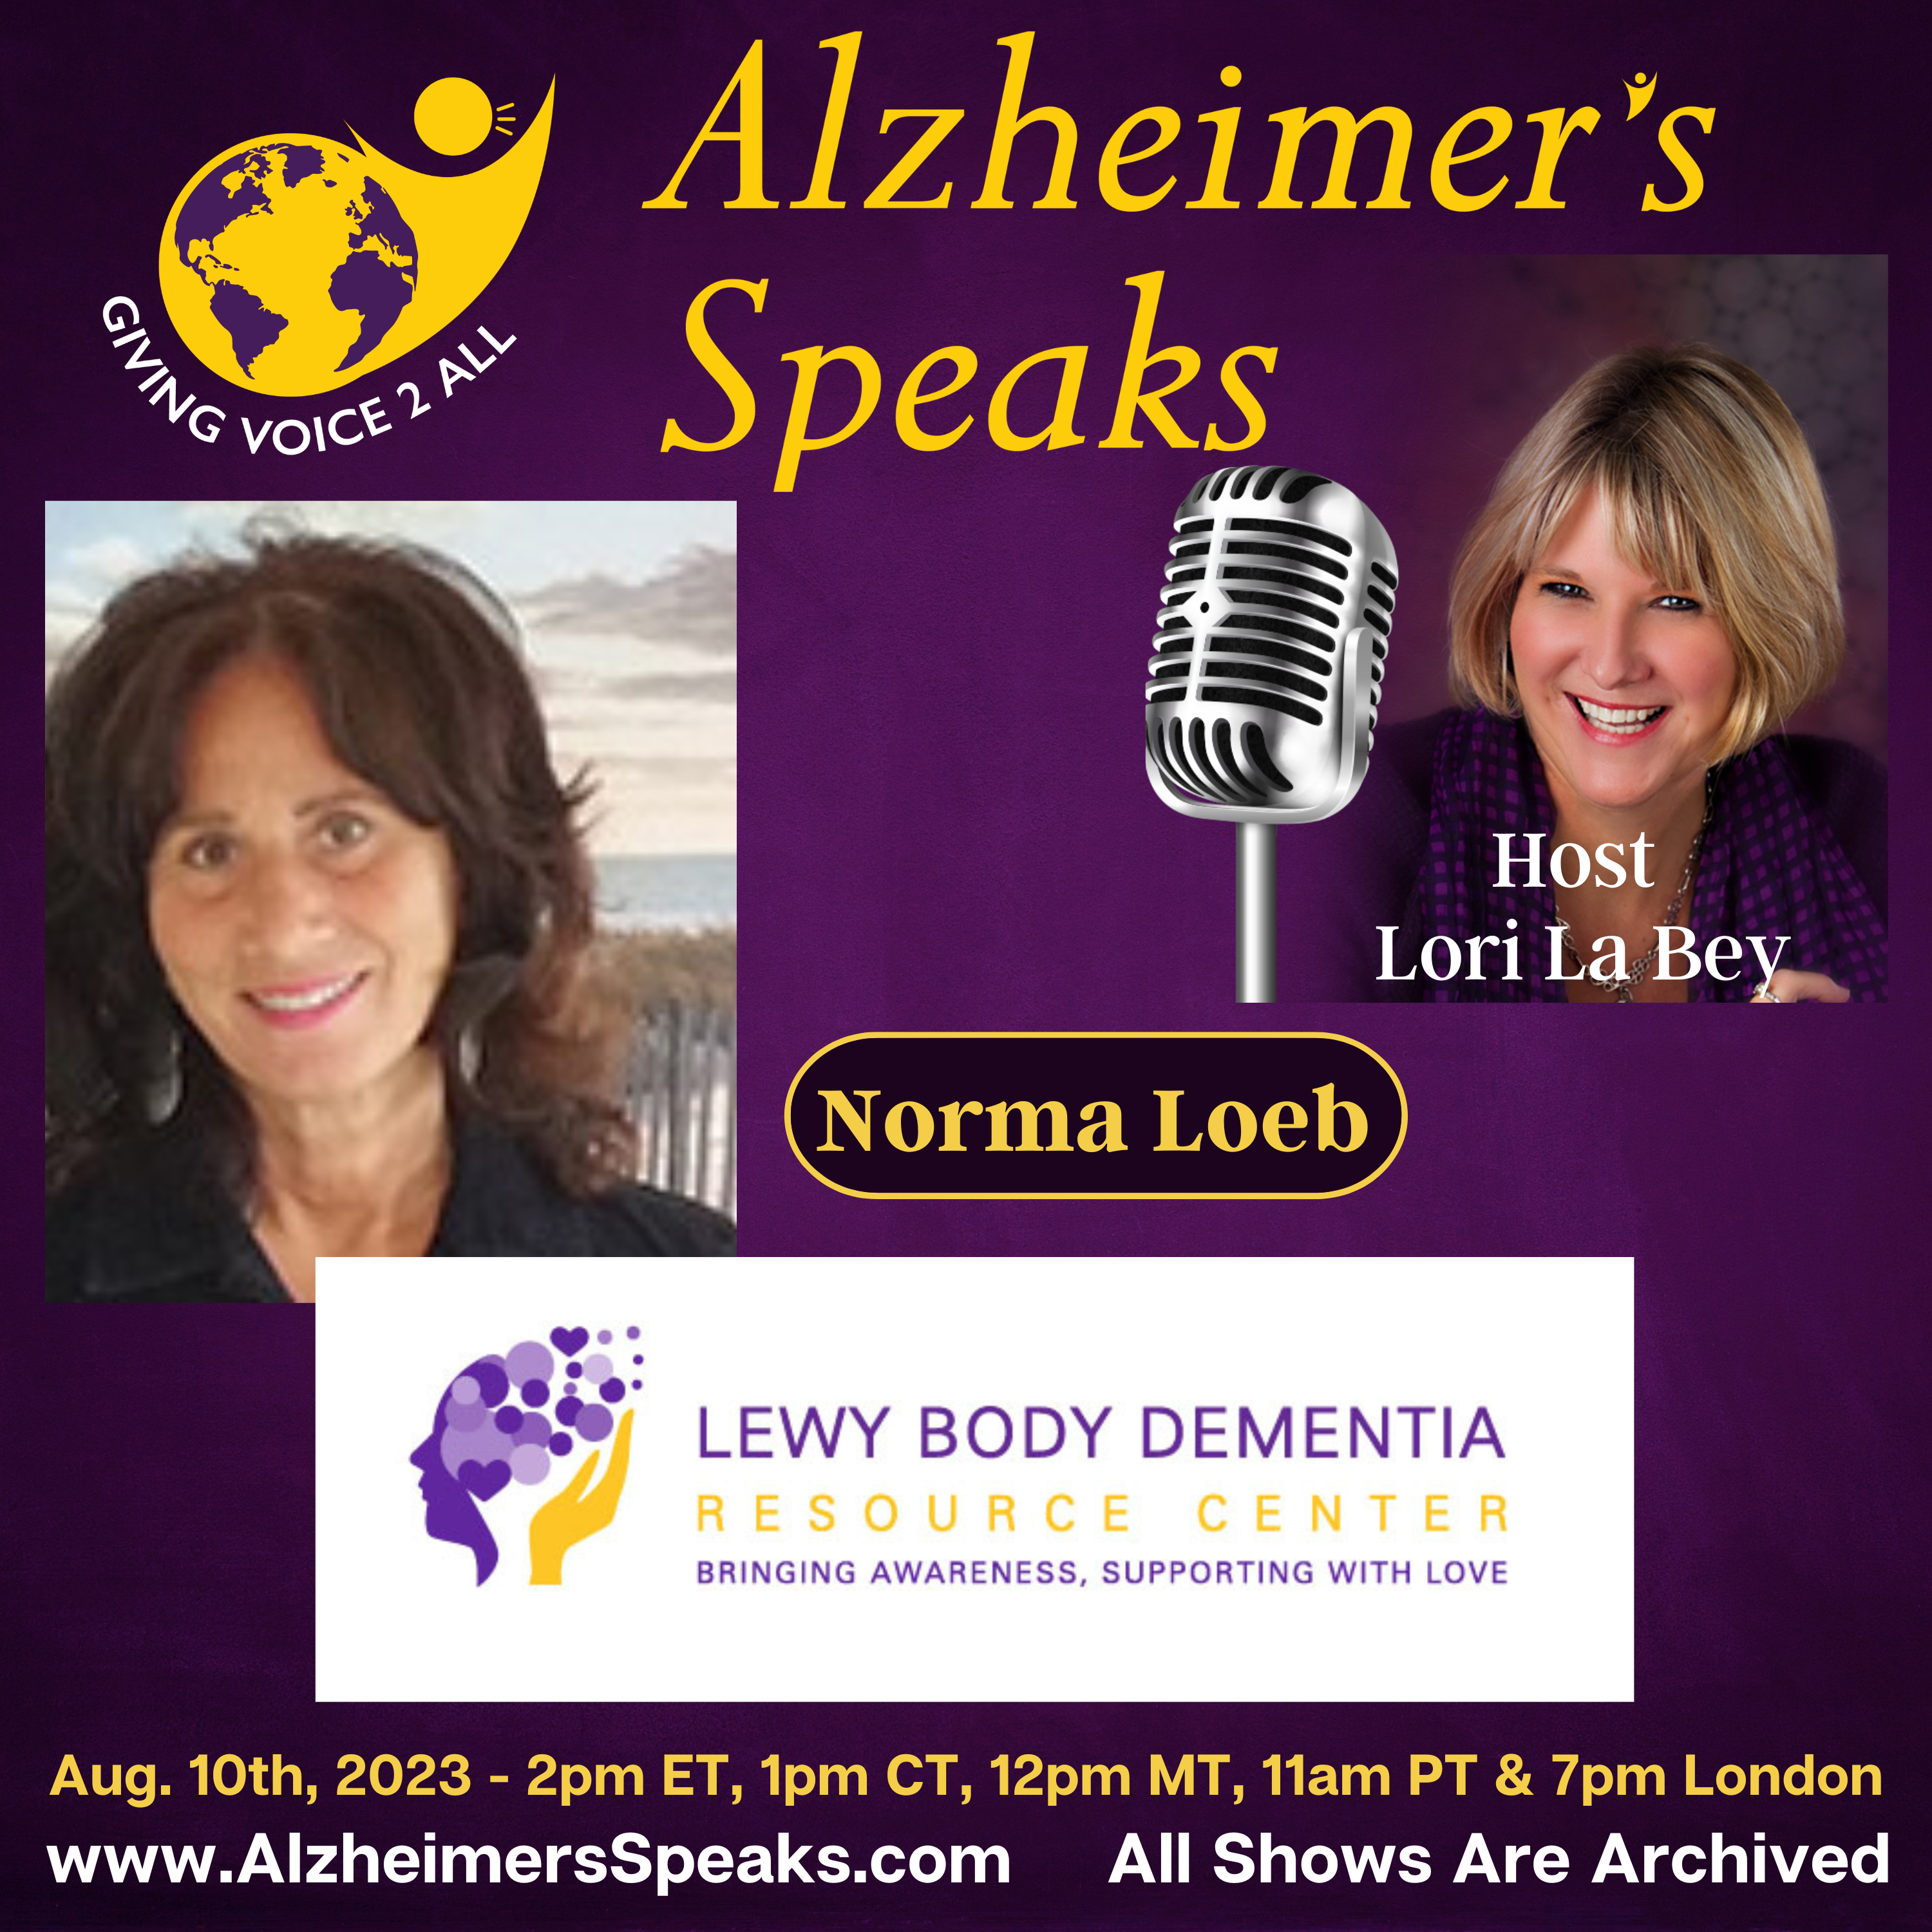 The Lewy Body Dementia Resource Center